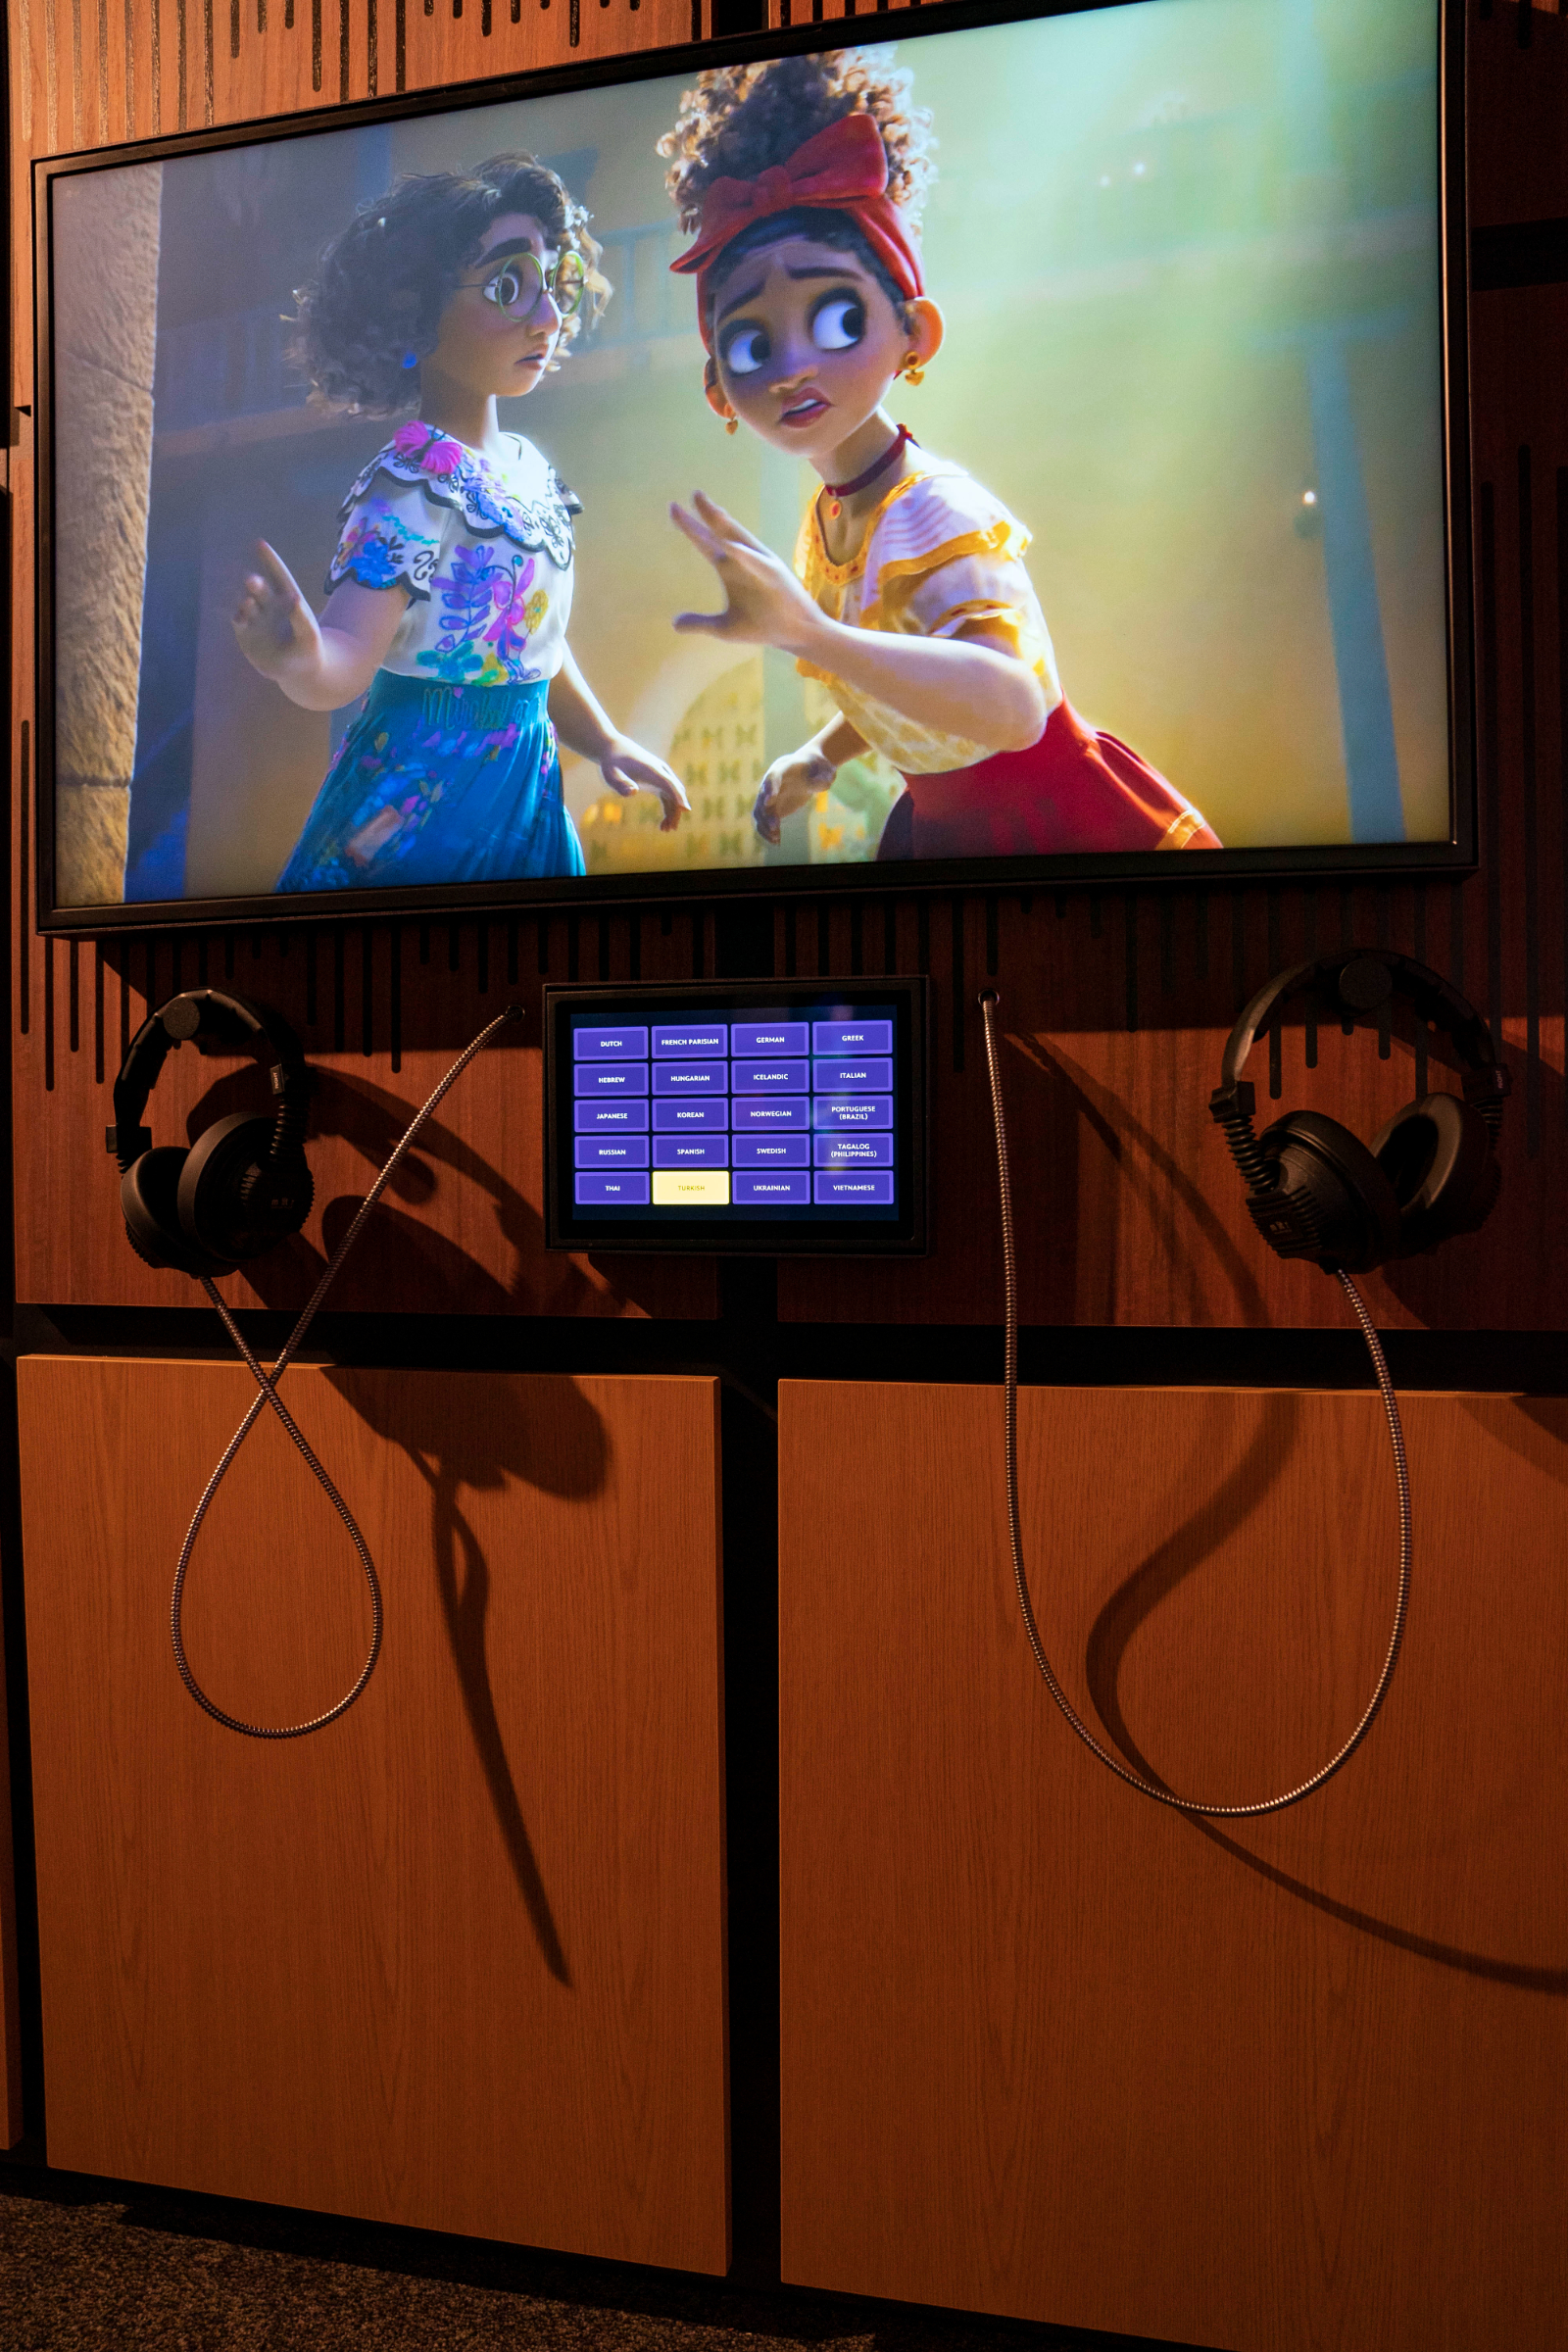 International music interactive for “We Don’t Talk About Bruno” from Encanto (2021), where guests can select which language they’d like to listen to inside The Magic of Sound and Music gallery at Disney100: The Exhibition, now open at The Franklin Institute in Philadelphia. ©Disney